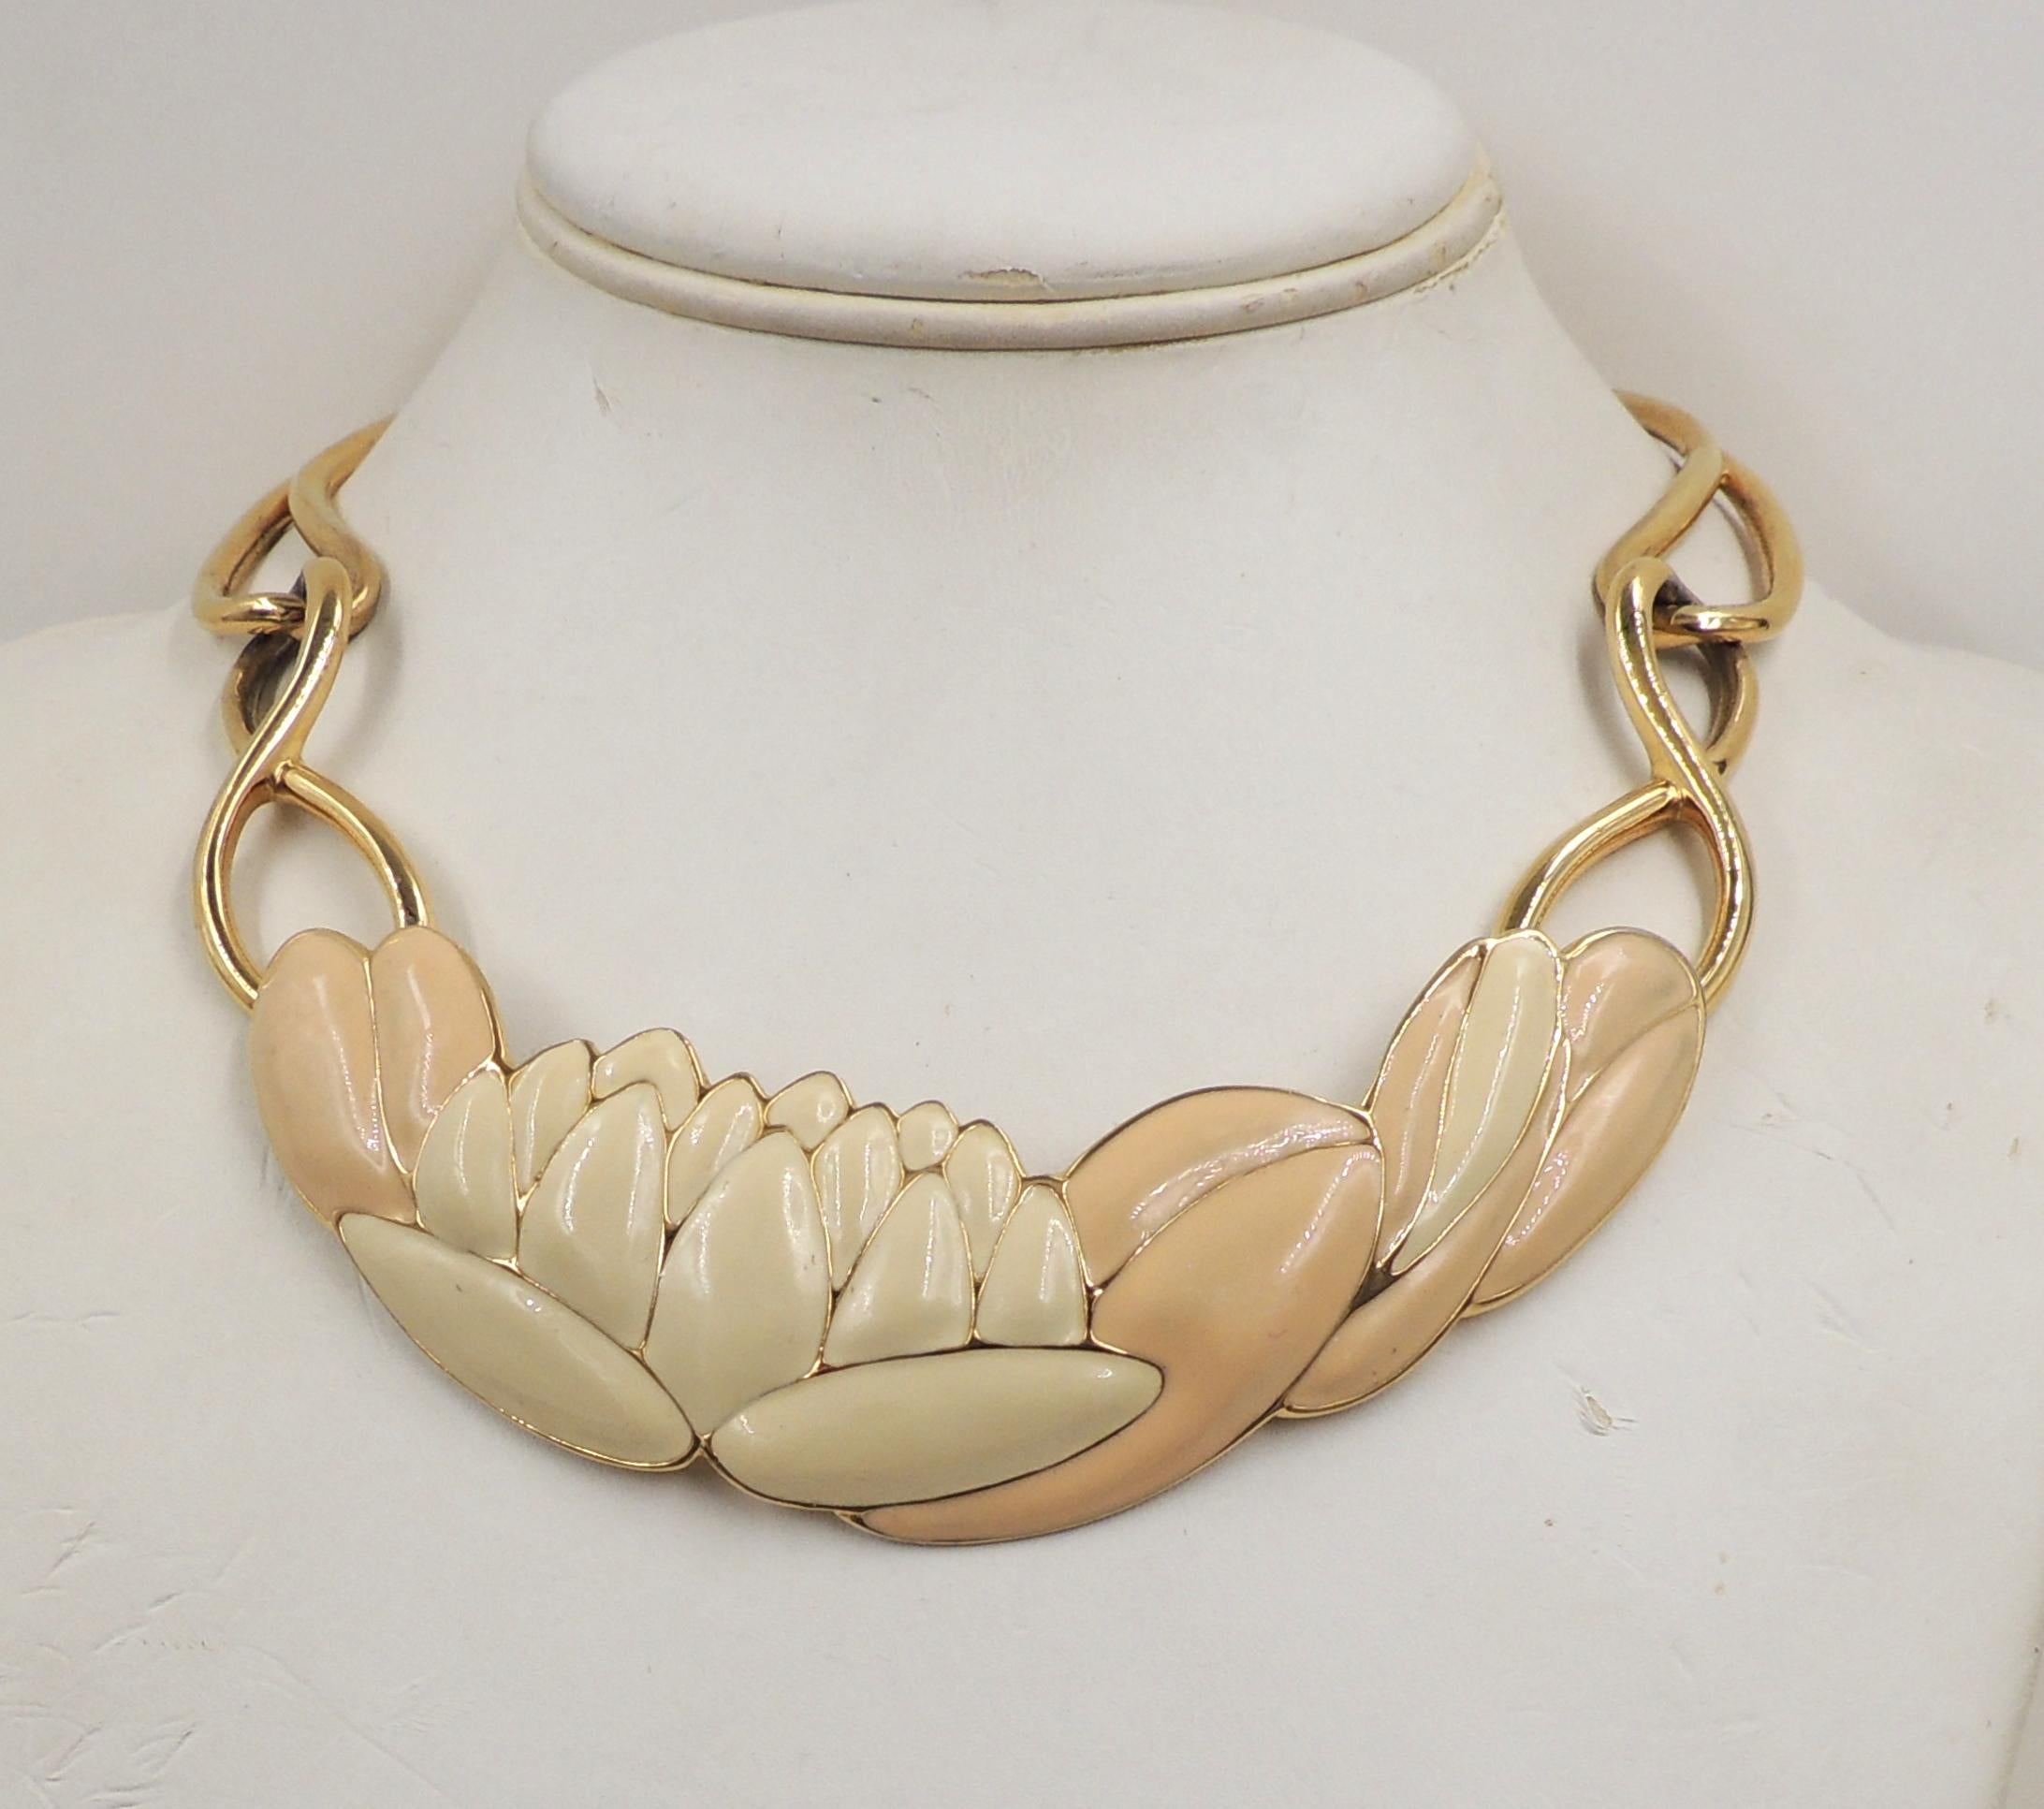 Modern Vintage 1980s Signed Monet Enamel Water Lilly Collar Necklace For Sale